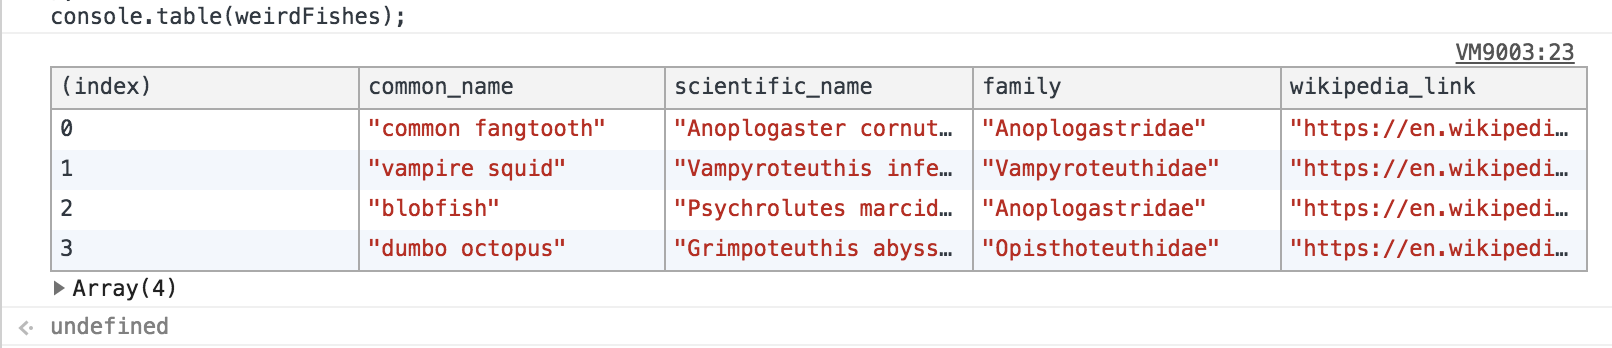 Output of running console.table on an array of objects in Chrome